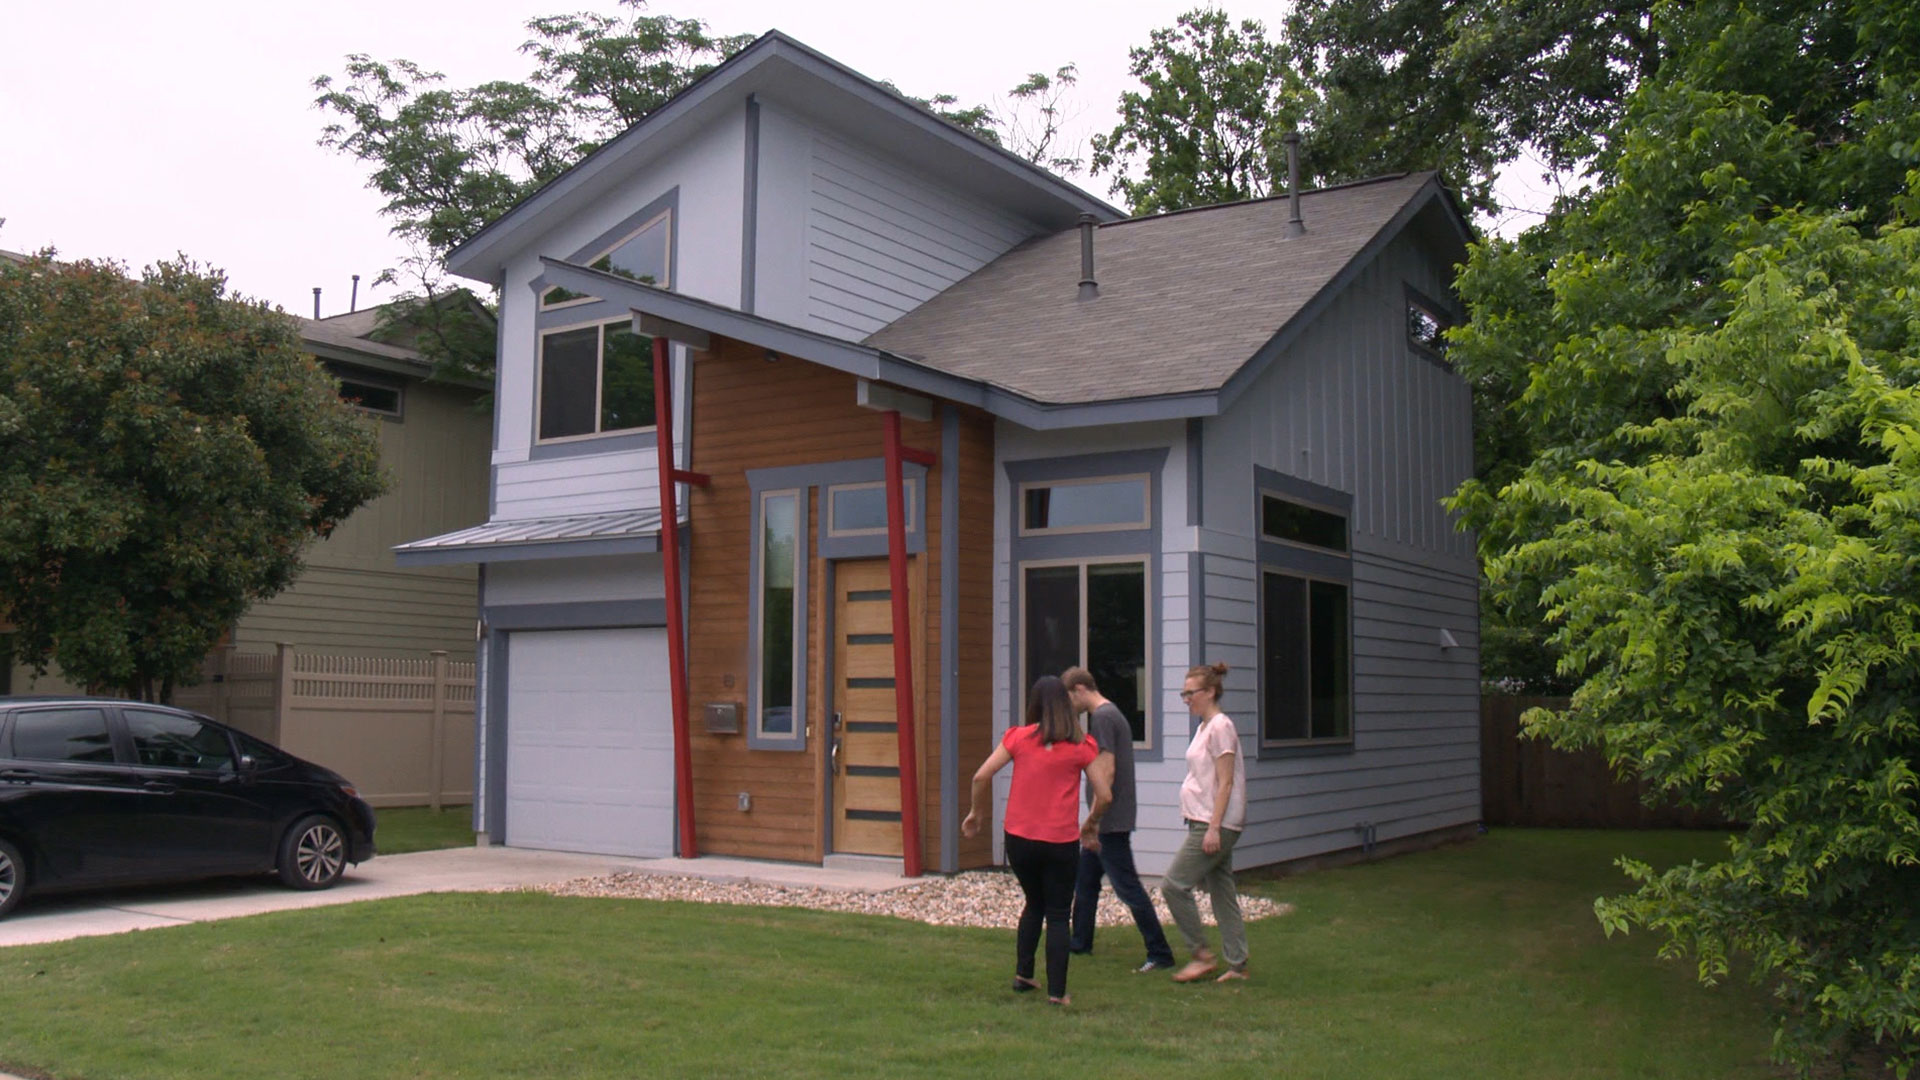 An Expanding Family Downsizes in Austin